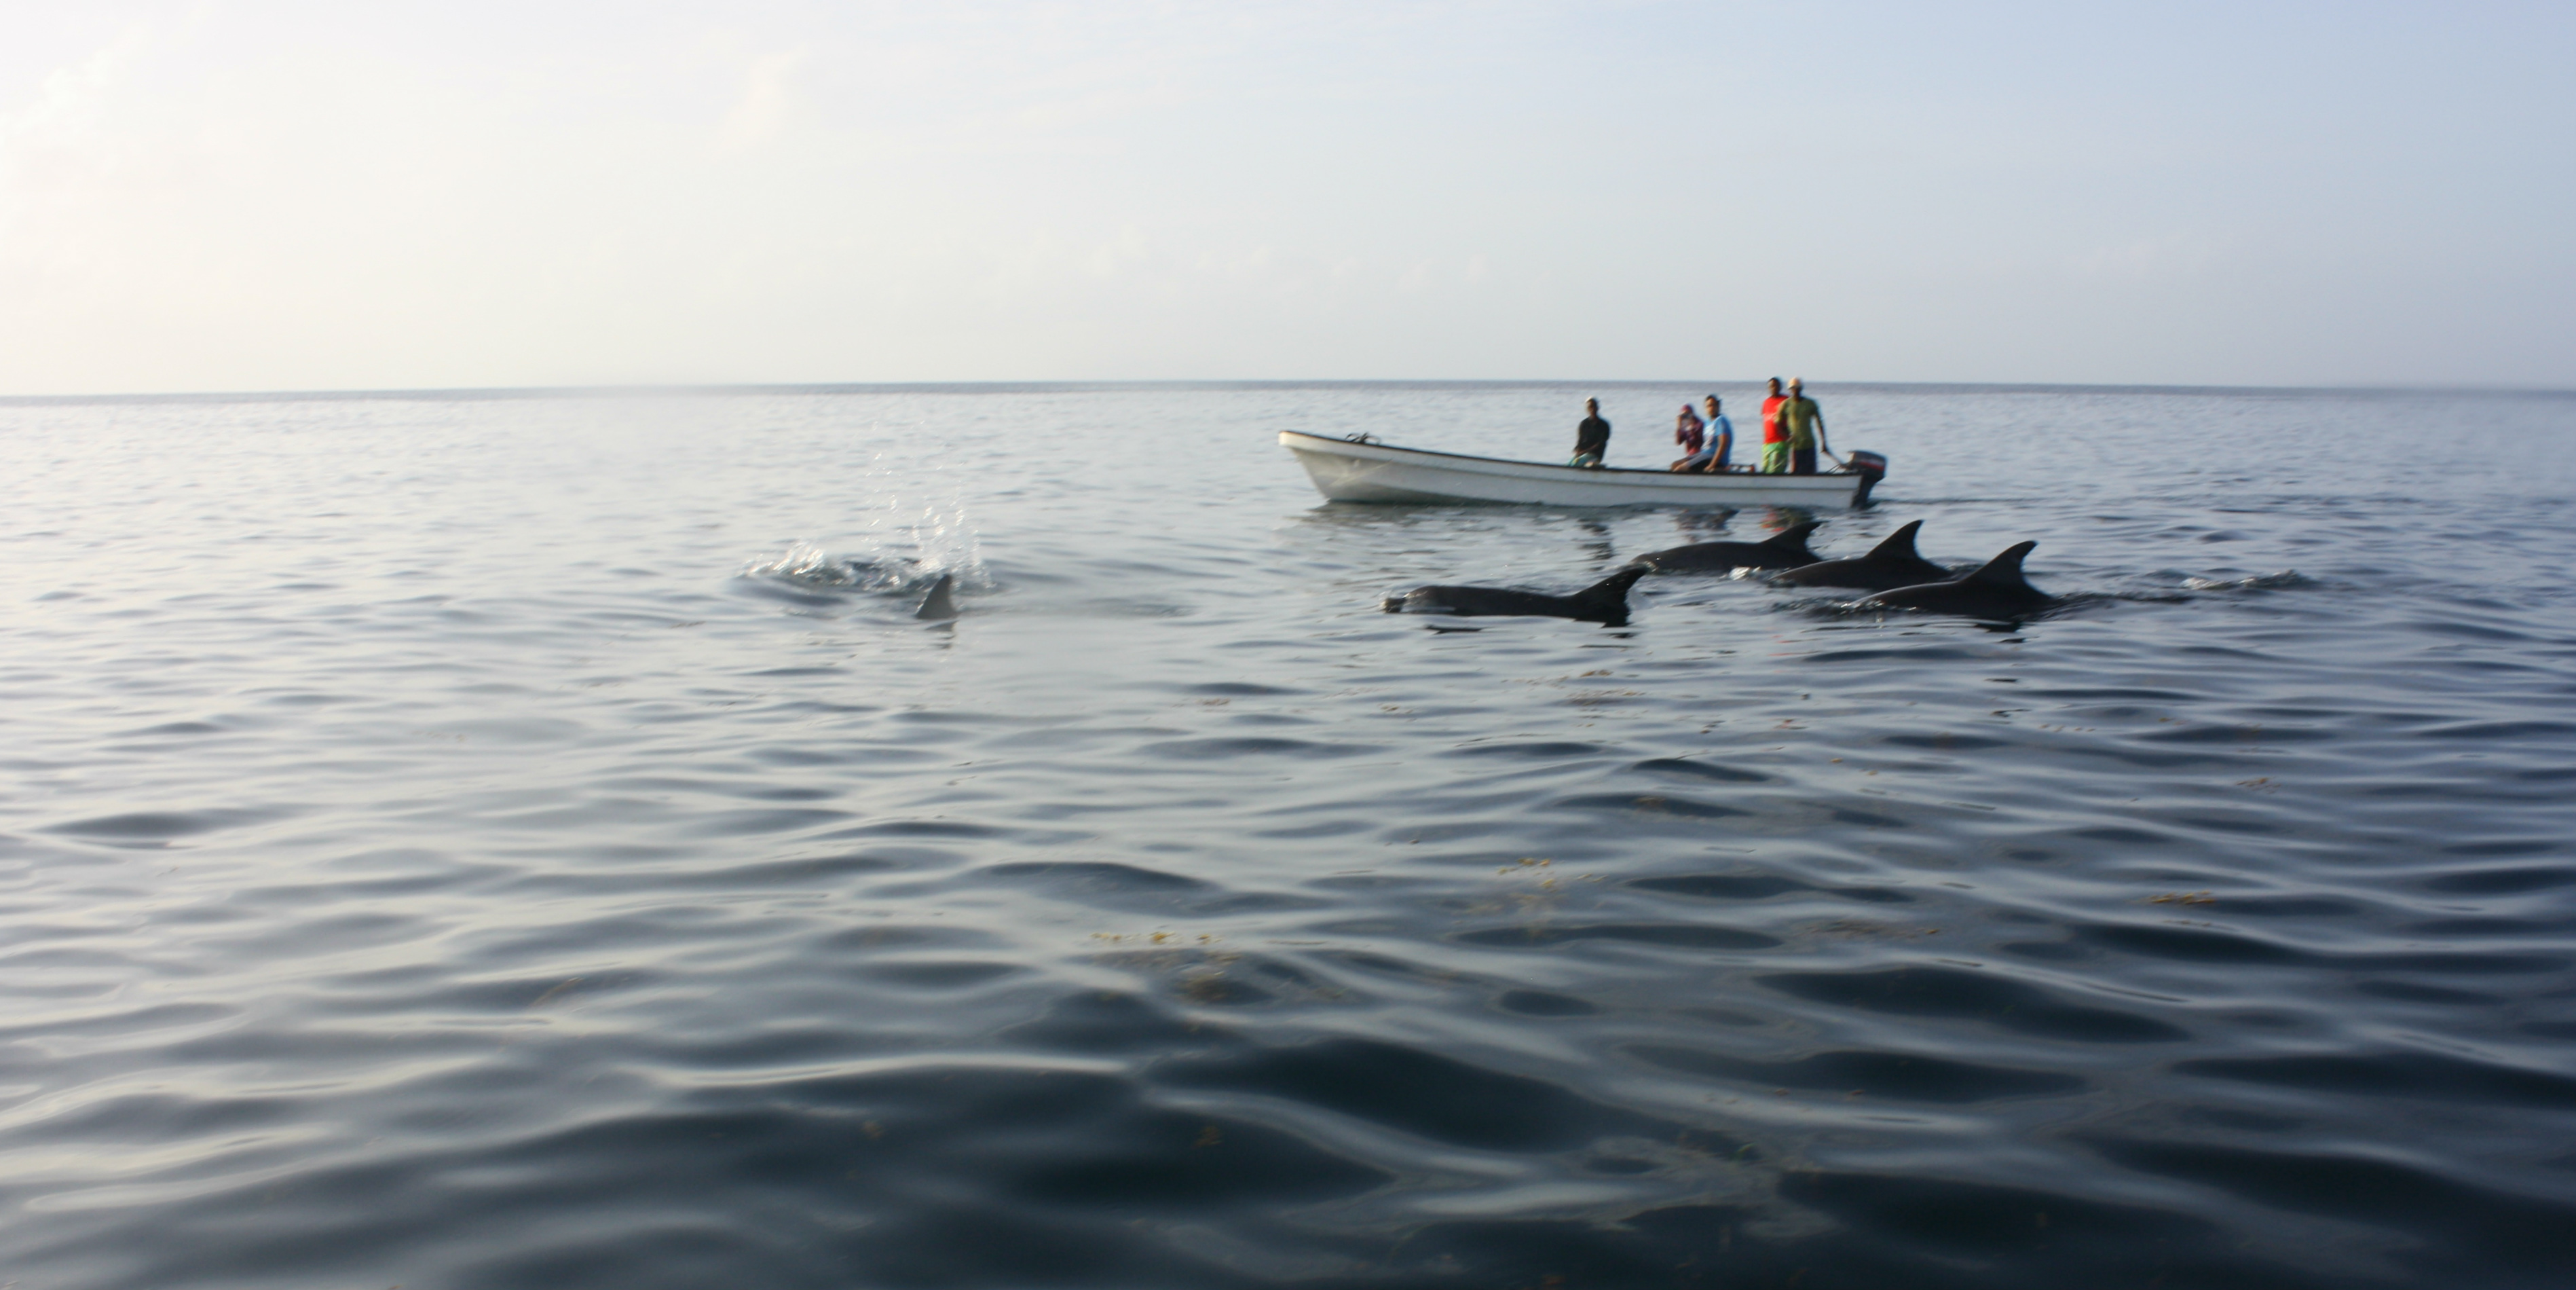 While on an animal volunteer vacation in Zanzibar, you could help to collect data on dophin like these.